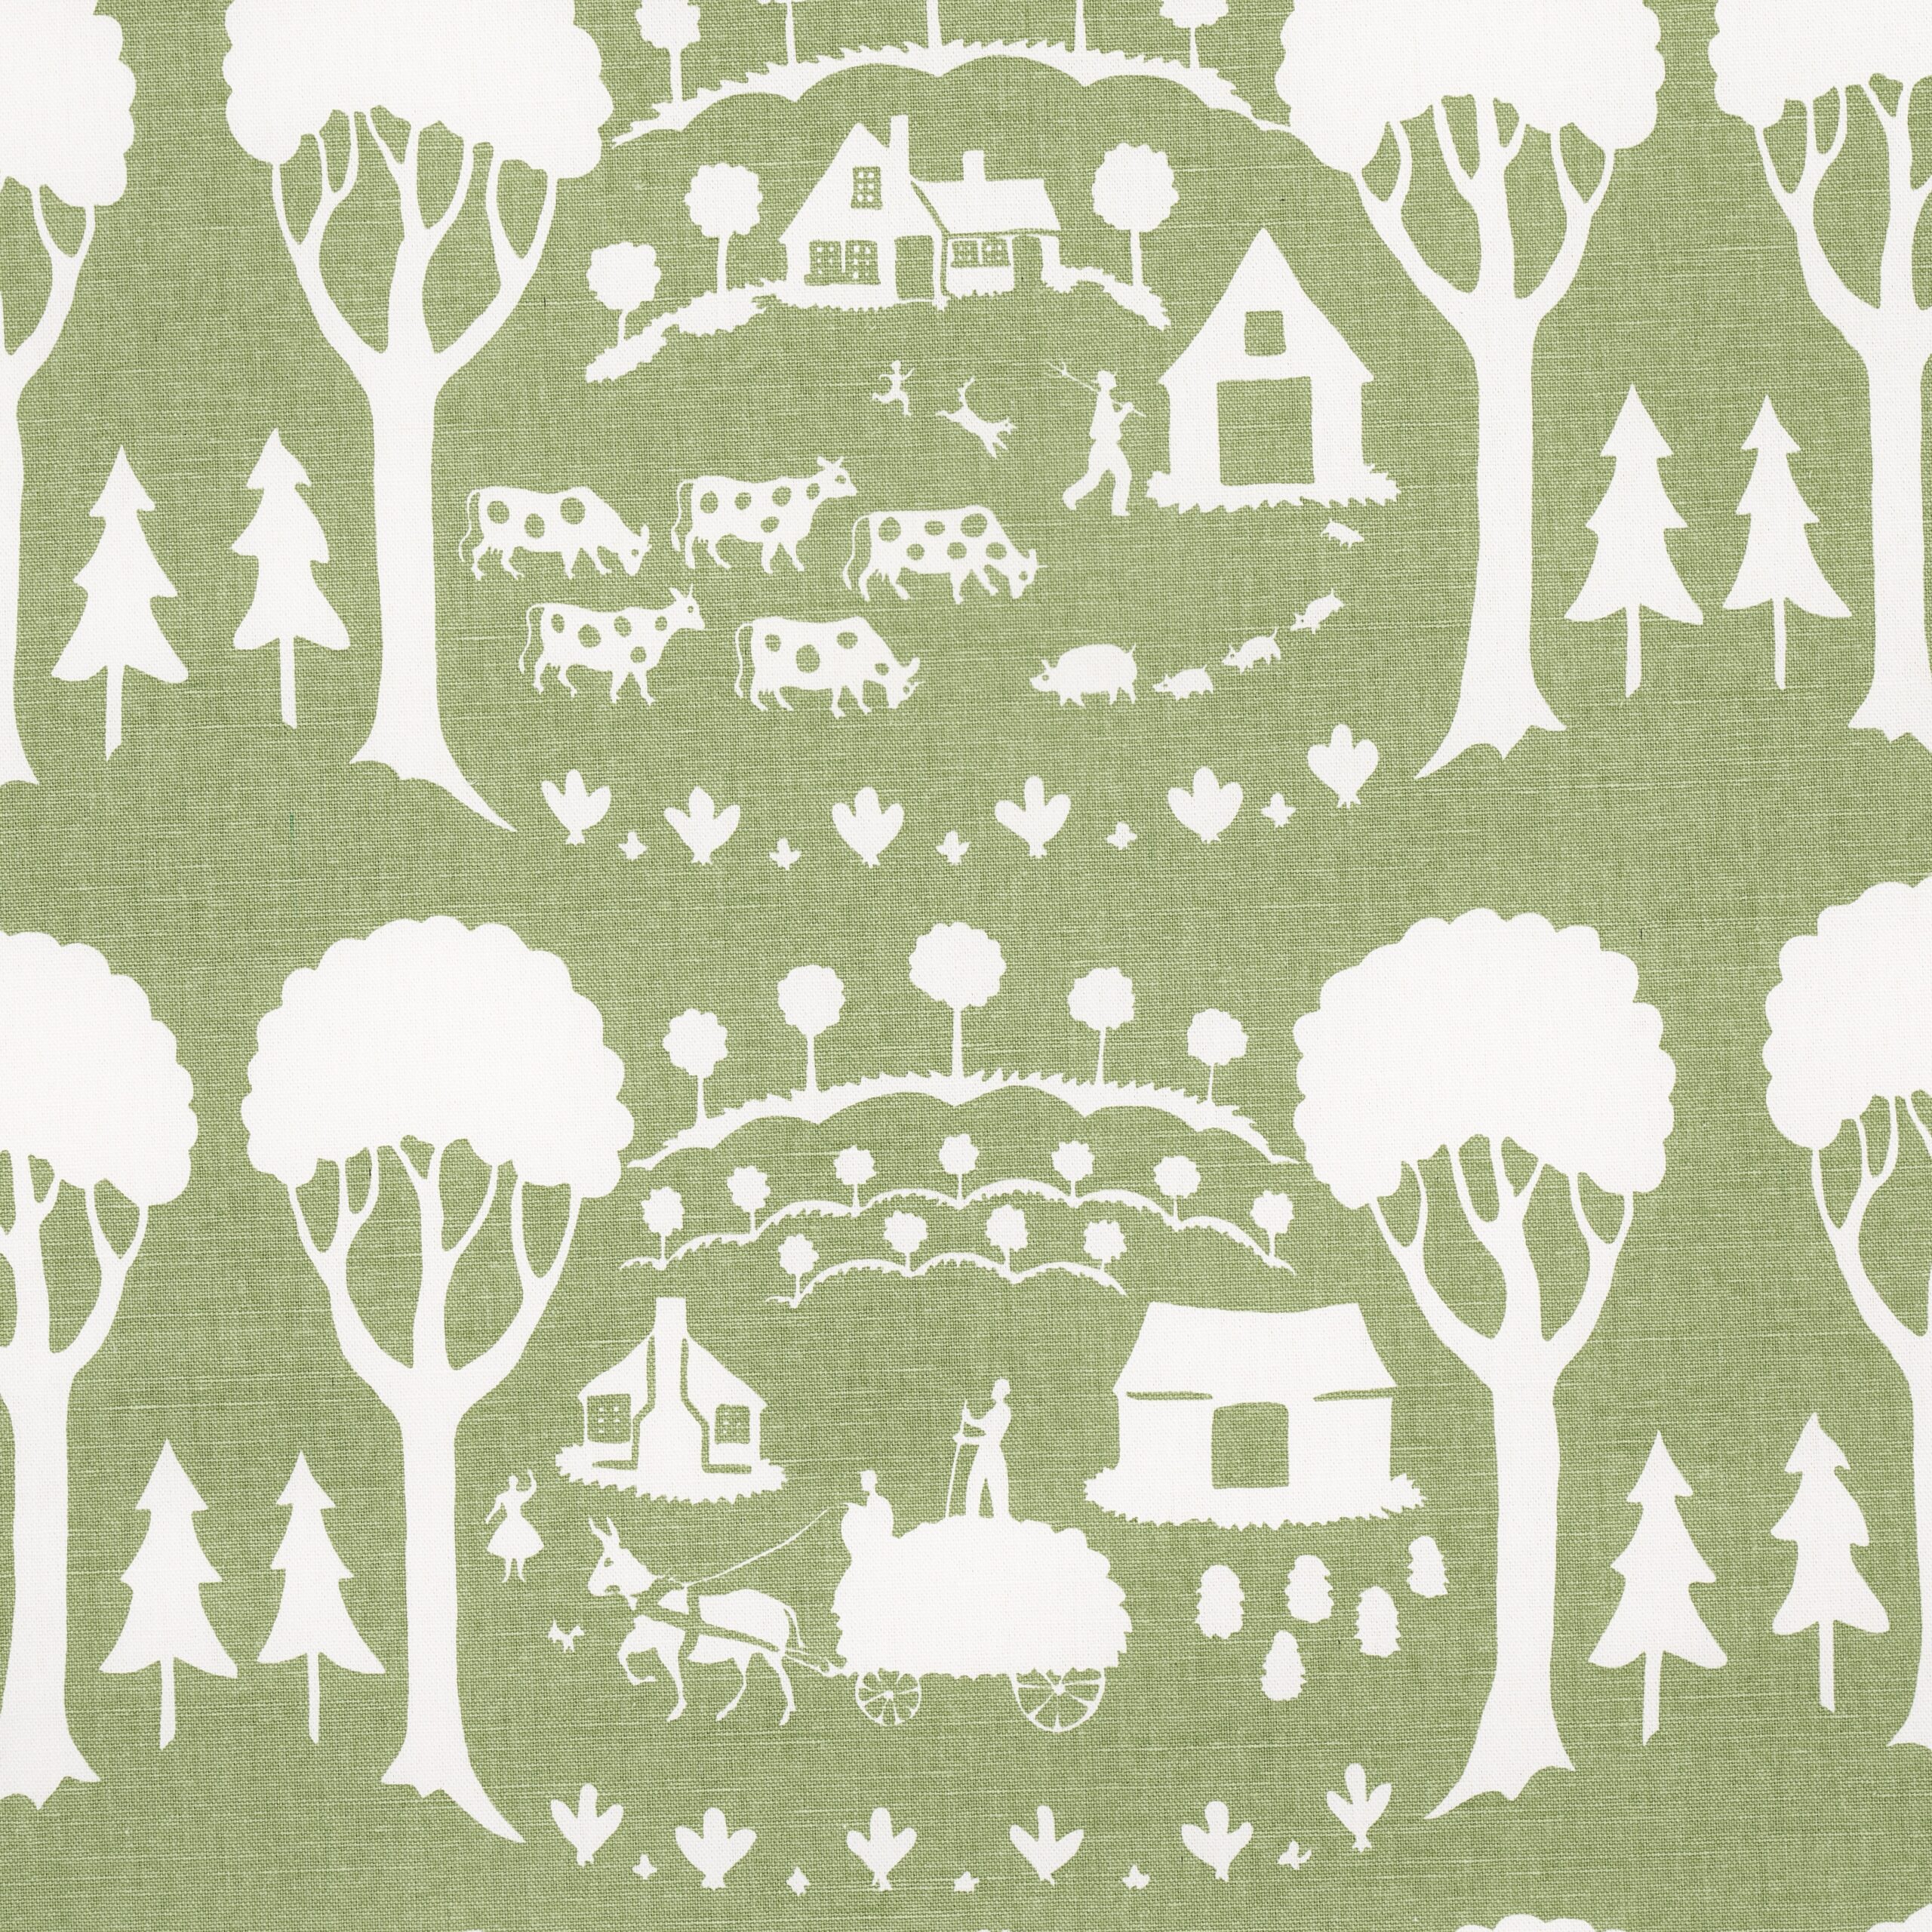 Schumacher Farm Scene fabric in Green, from the Folly Cove Collection